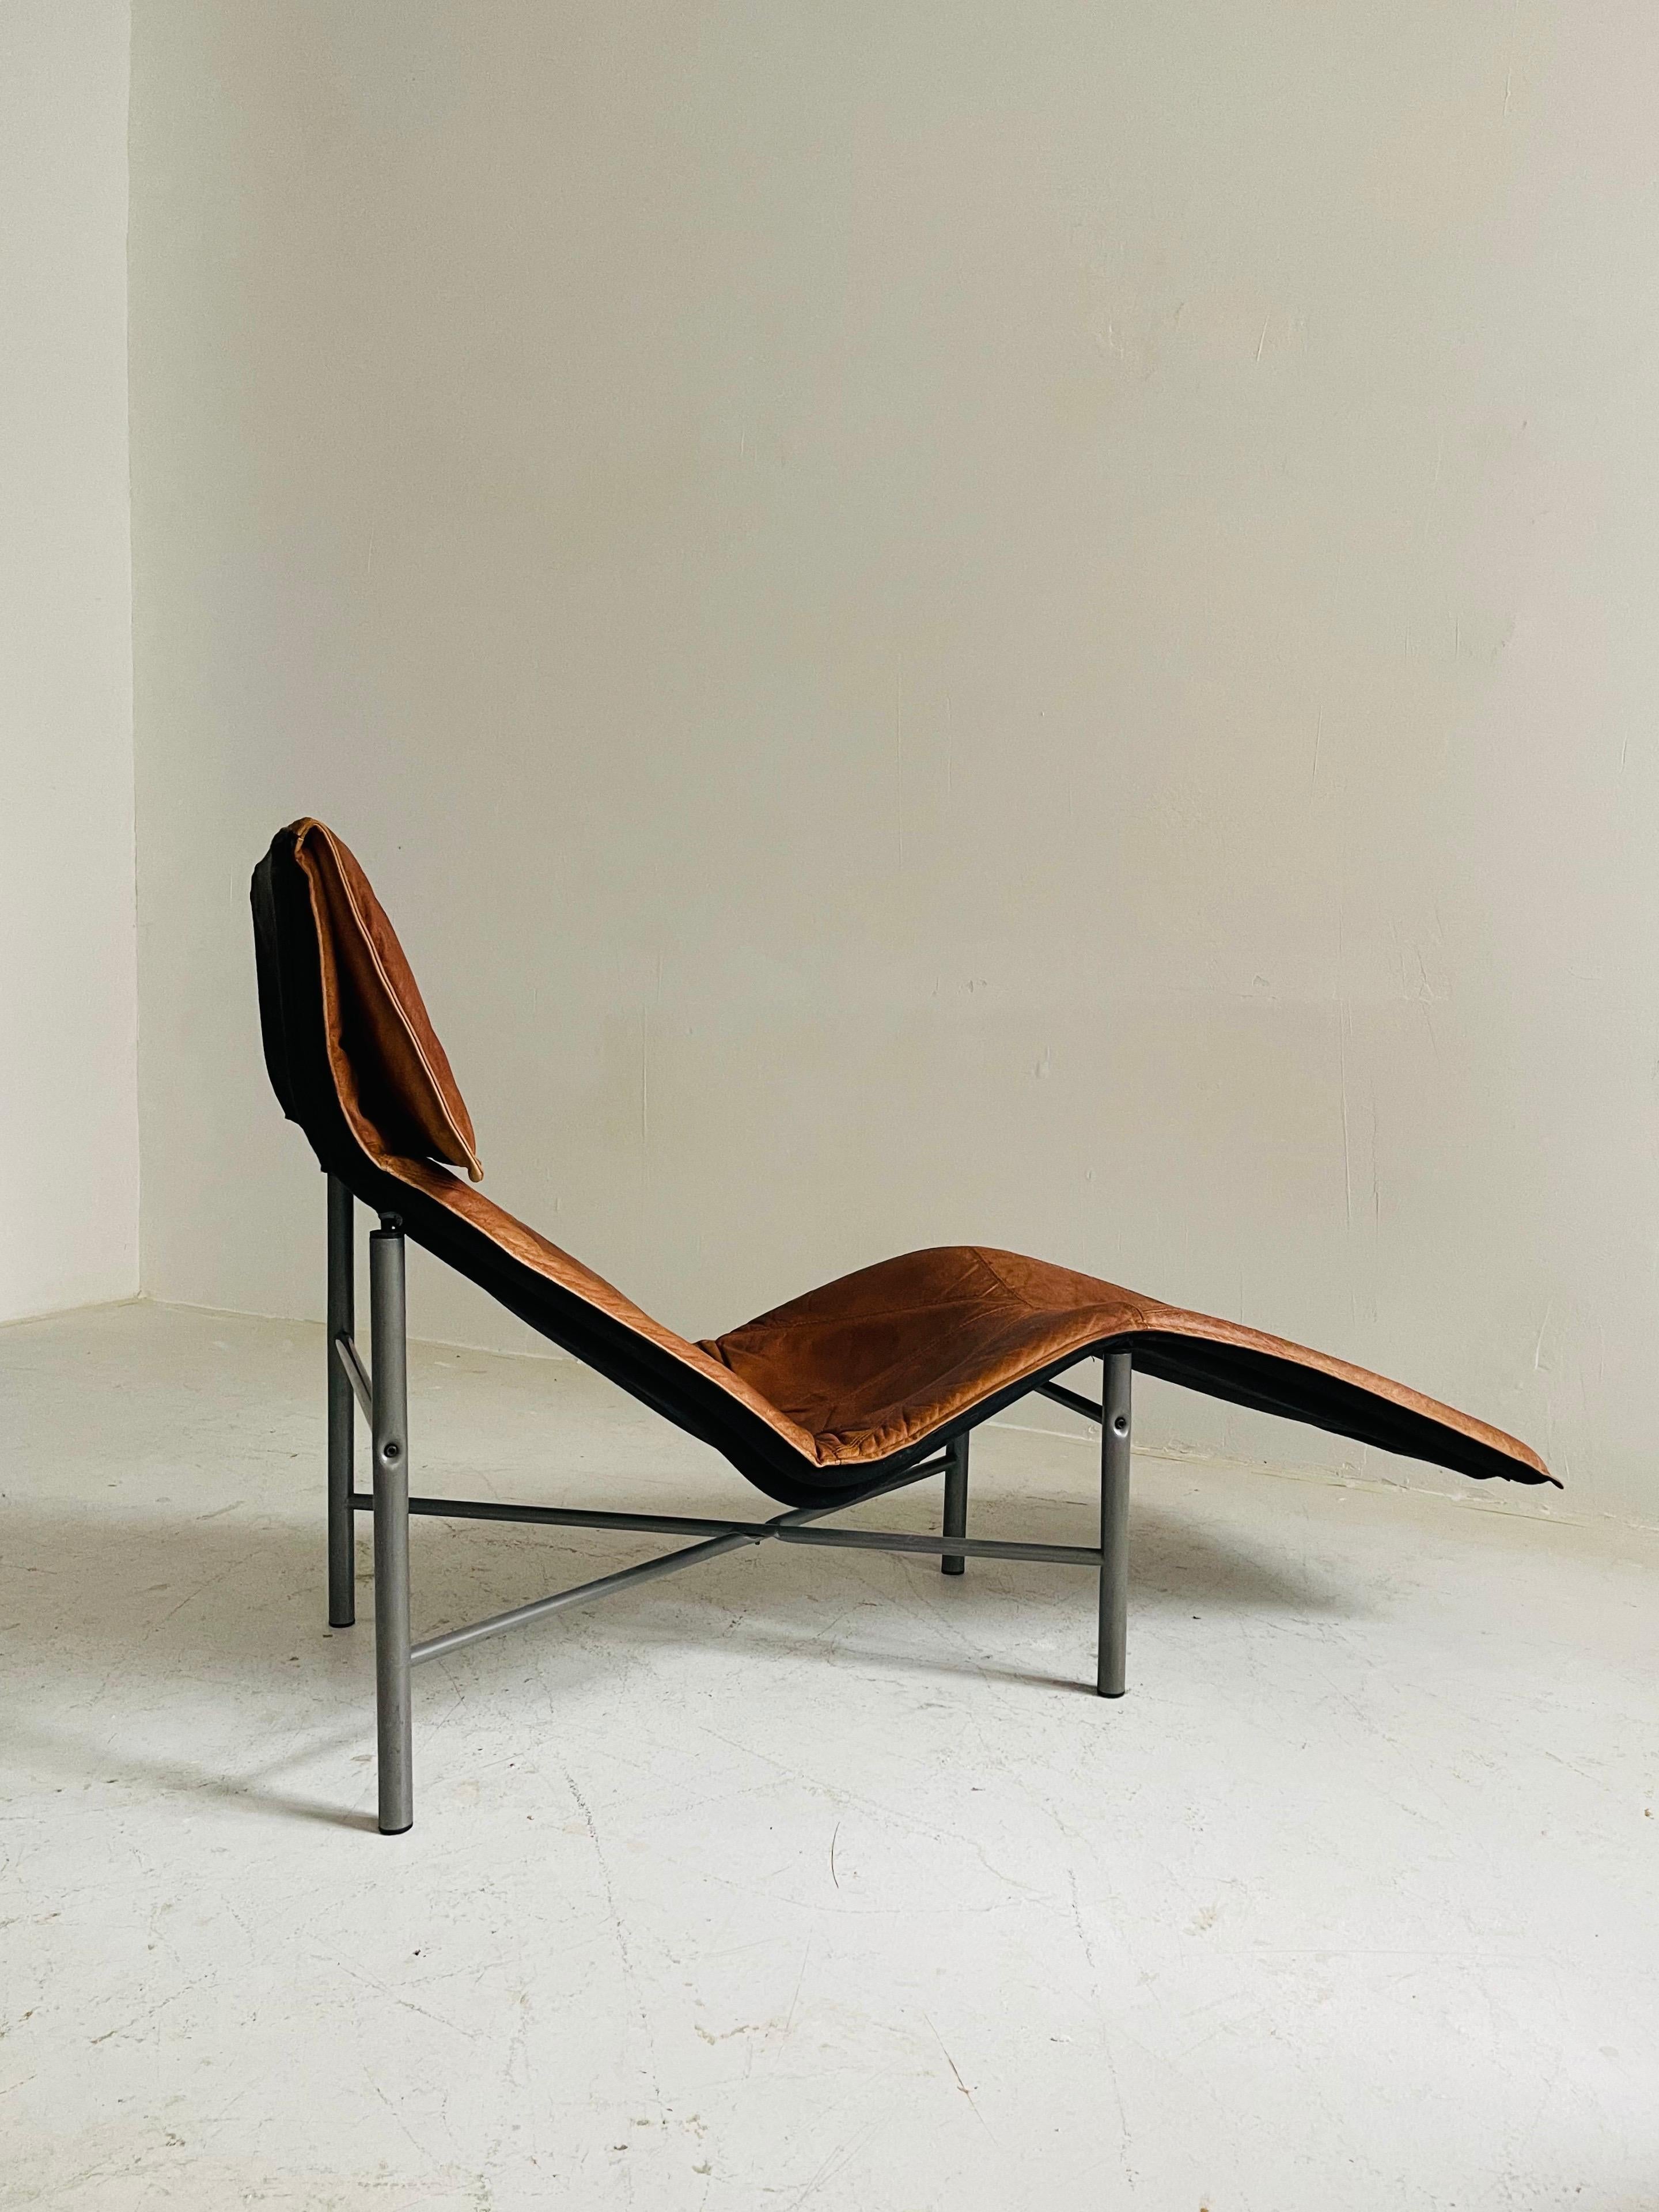 Swedish Patinated Cognac Leather Chaise Longue by Tord Bjorklund, Sweden, 1970 For Sale